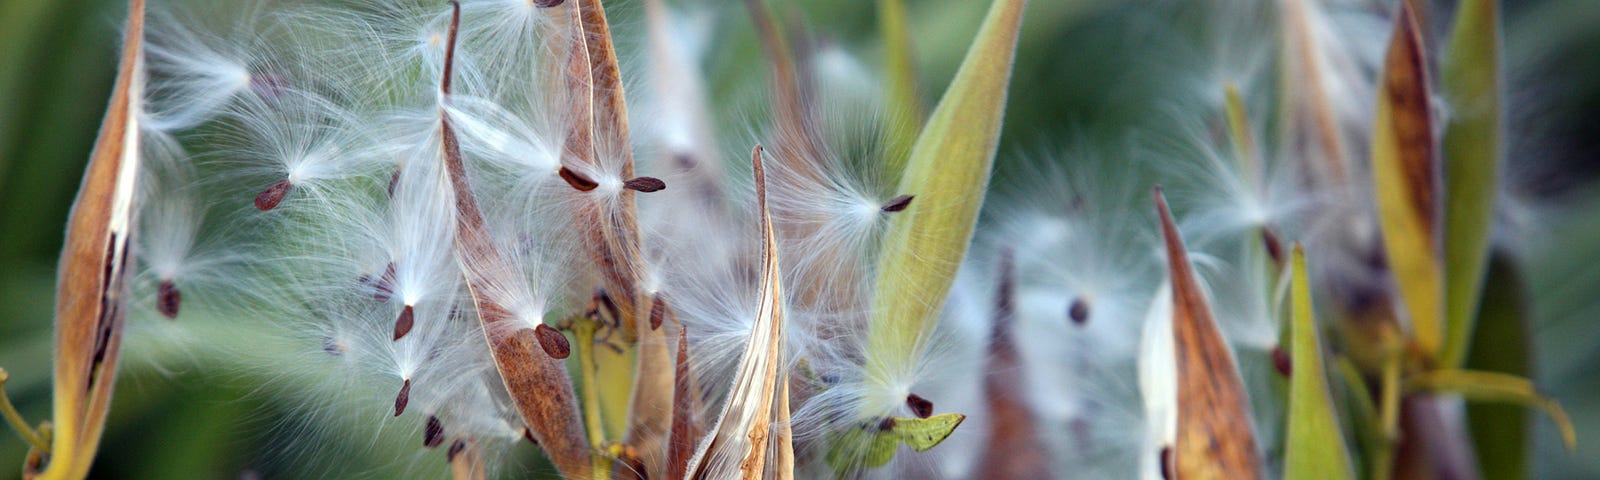 Open milkweed pods with fluff